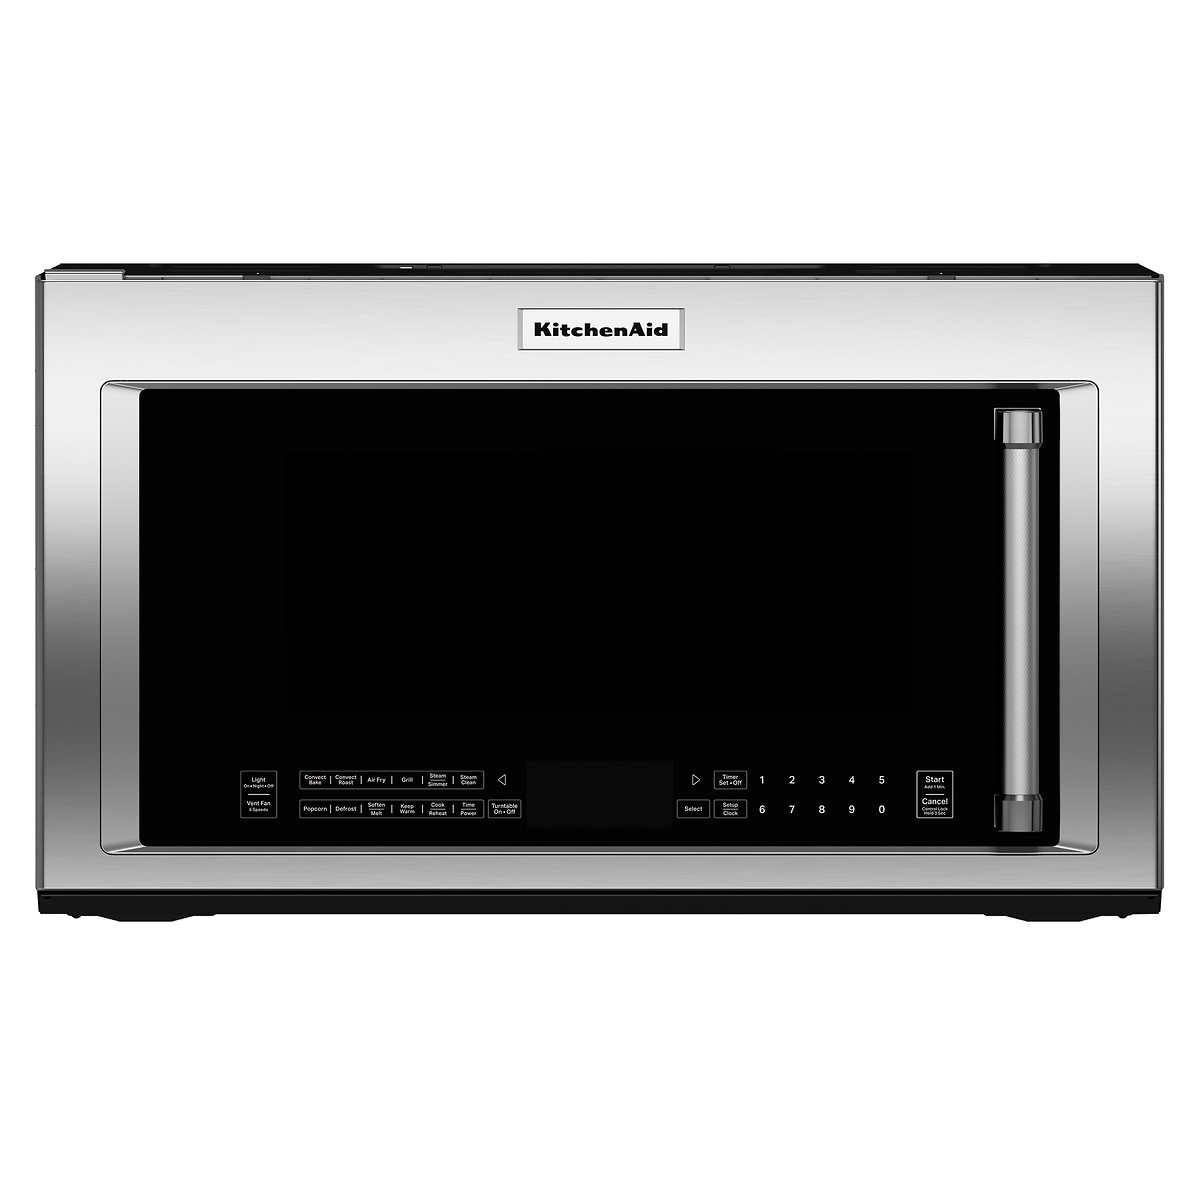 NEW - Kitchenaid 1.9 Cu. Ft. Over-the-range Convection Microwave With Air Fry Mode - Retail $799